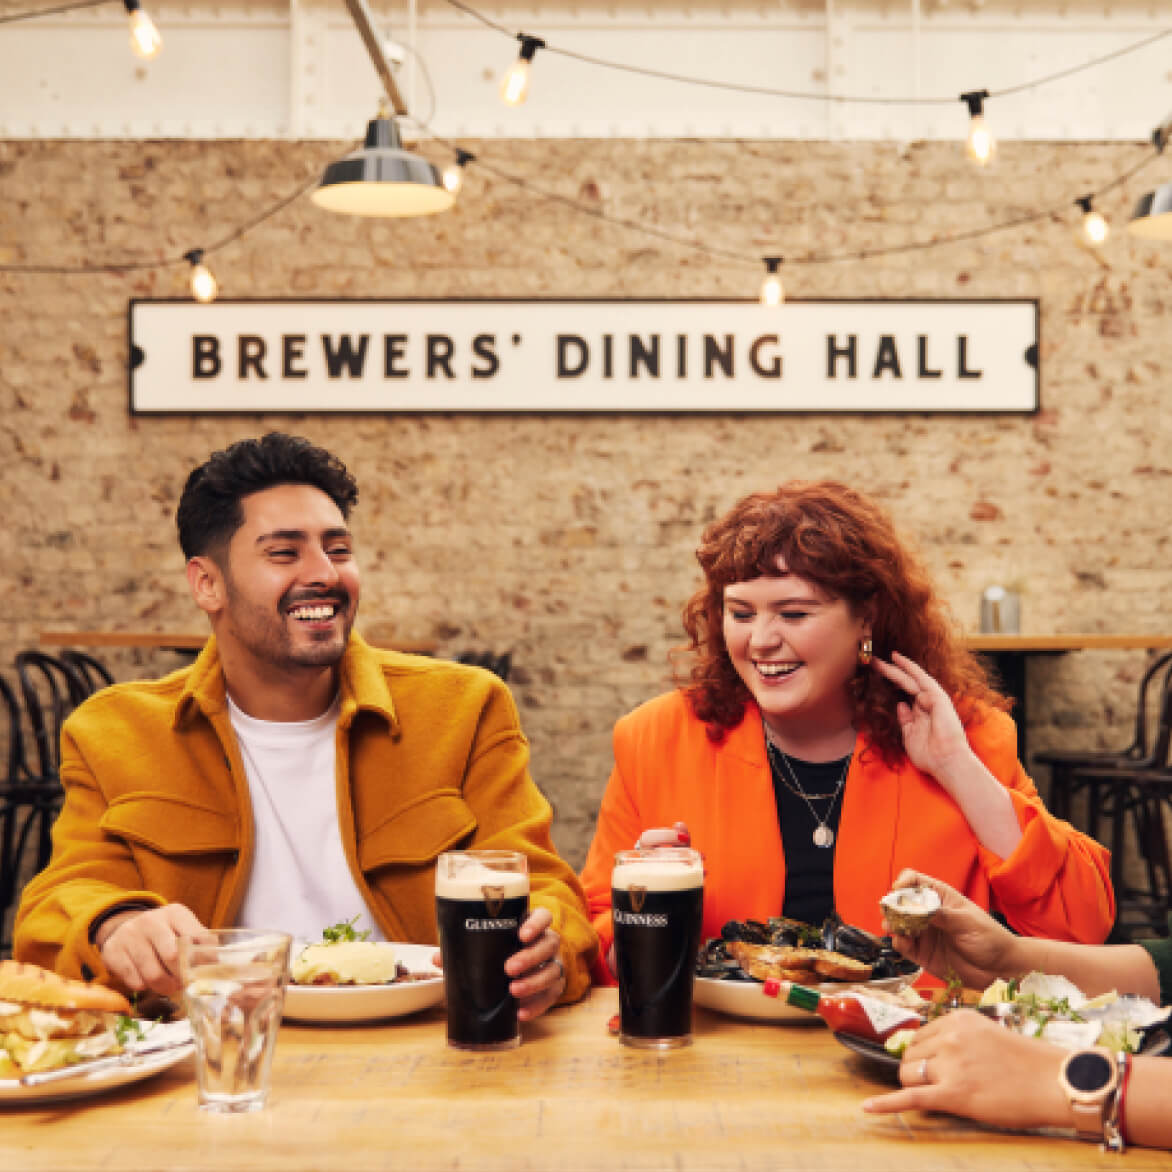  Large image of a group of friends laughing and enjoying their meal at the Brewers’ Dining Hall, with more pairings of mussels and Guinness Draught.